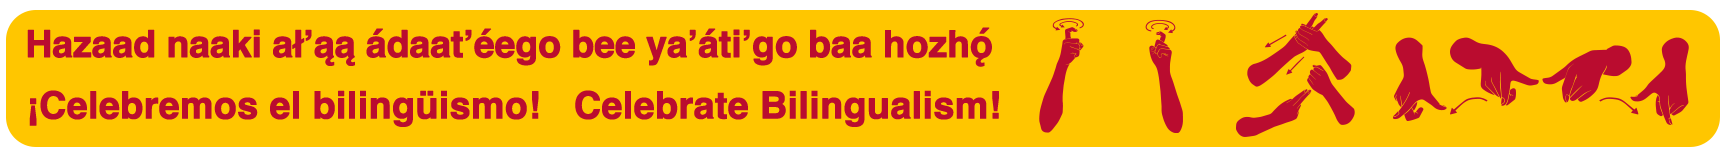 a yellow banner with red text that has translations of the phrase "Celebrate Bilingualism" in Spanish, Navajo, and ASL